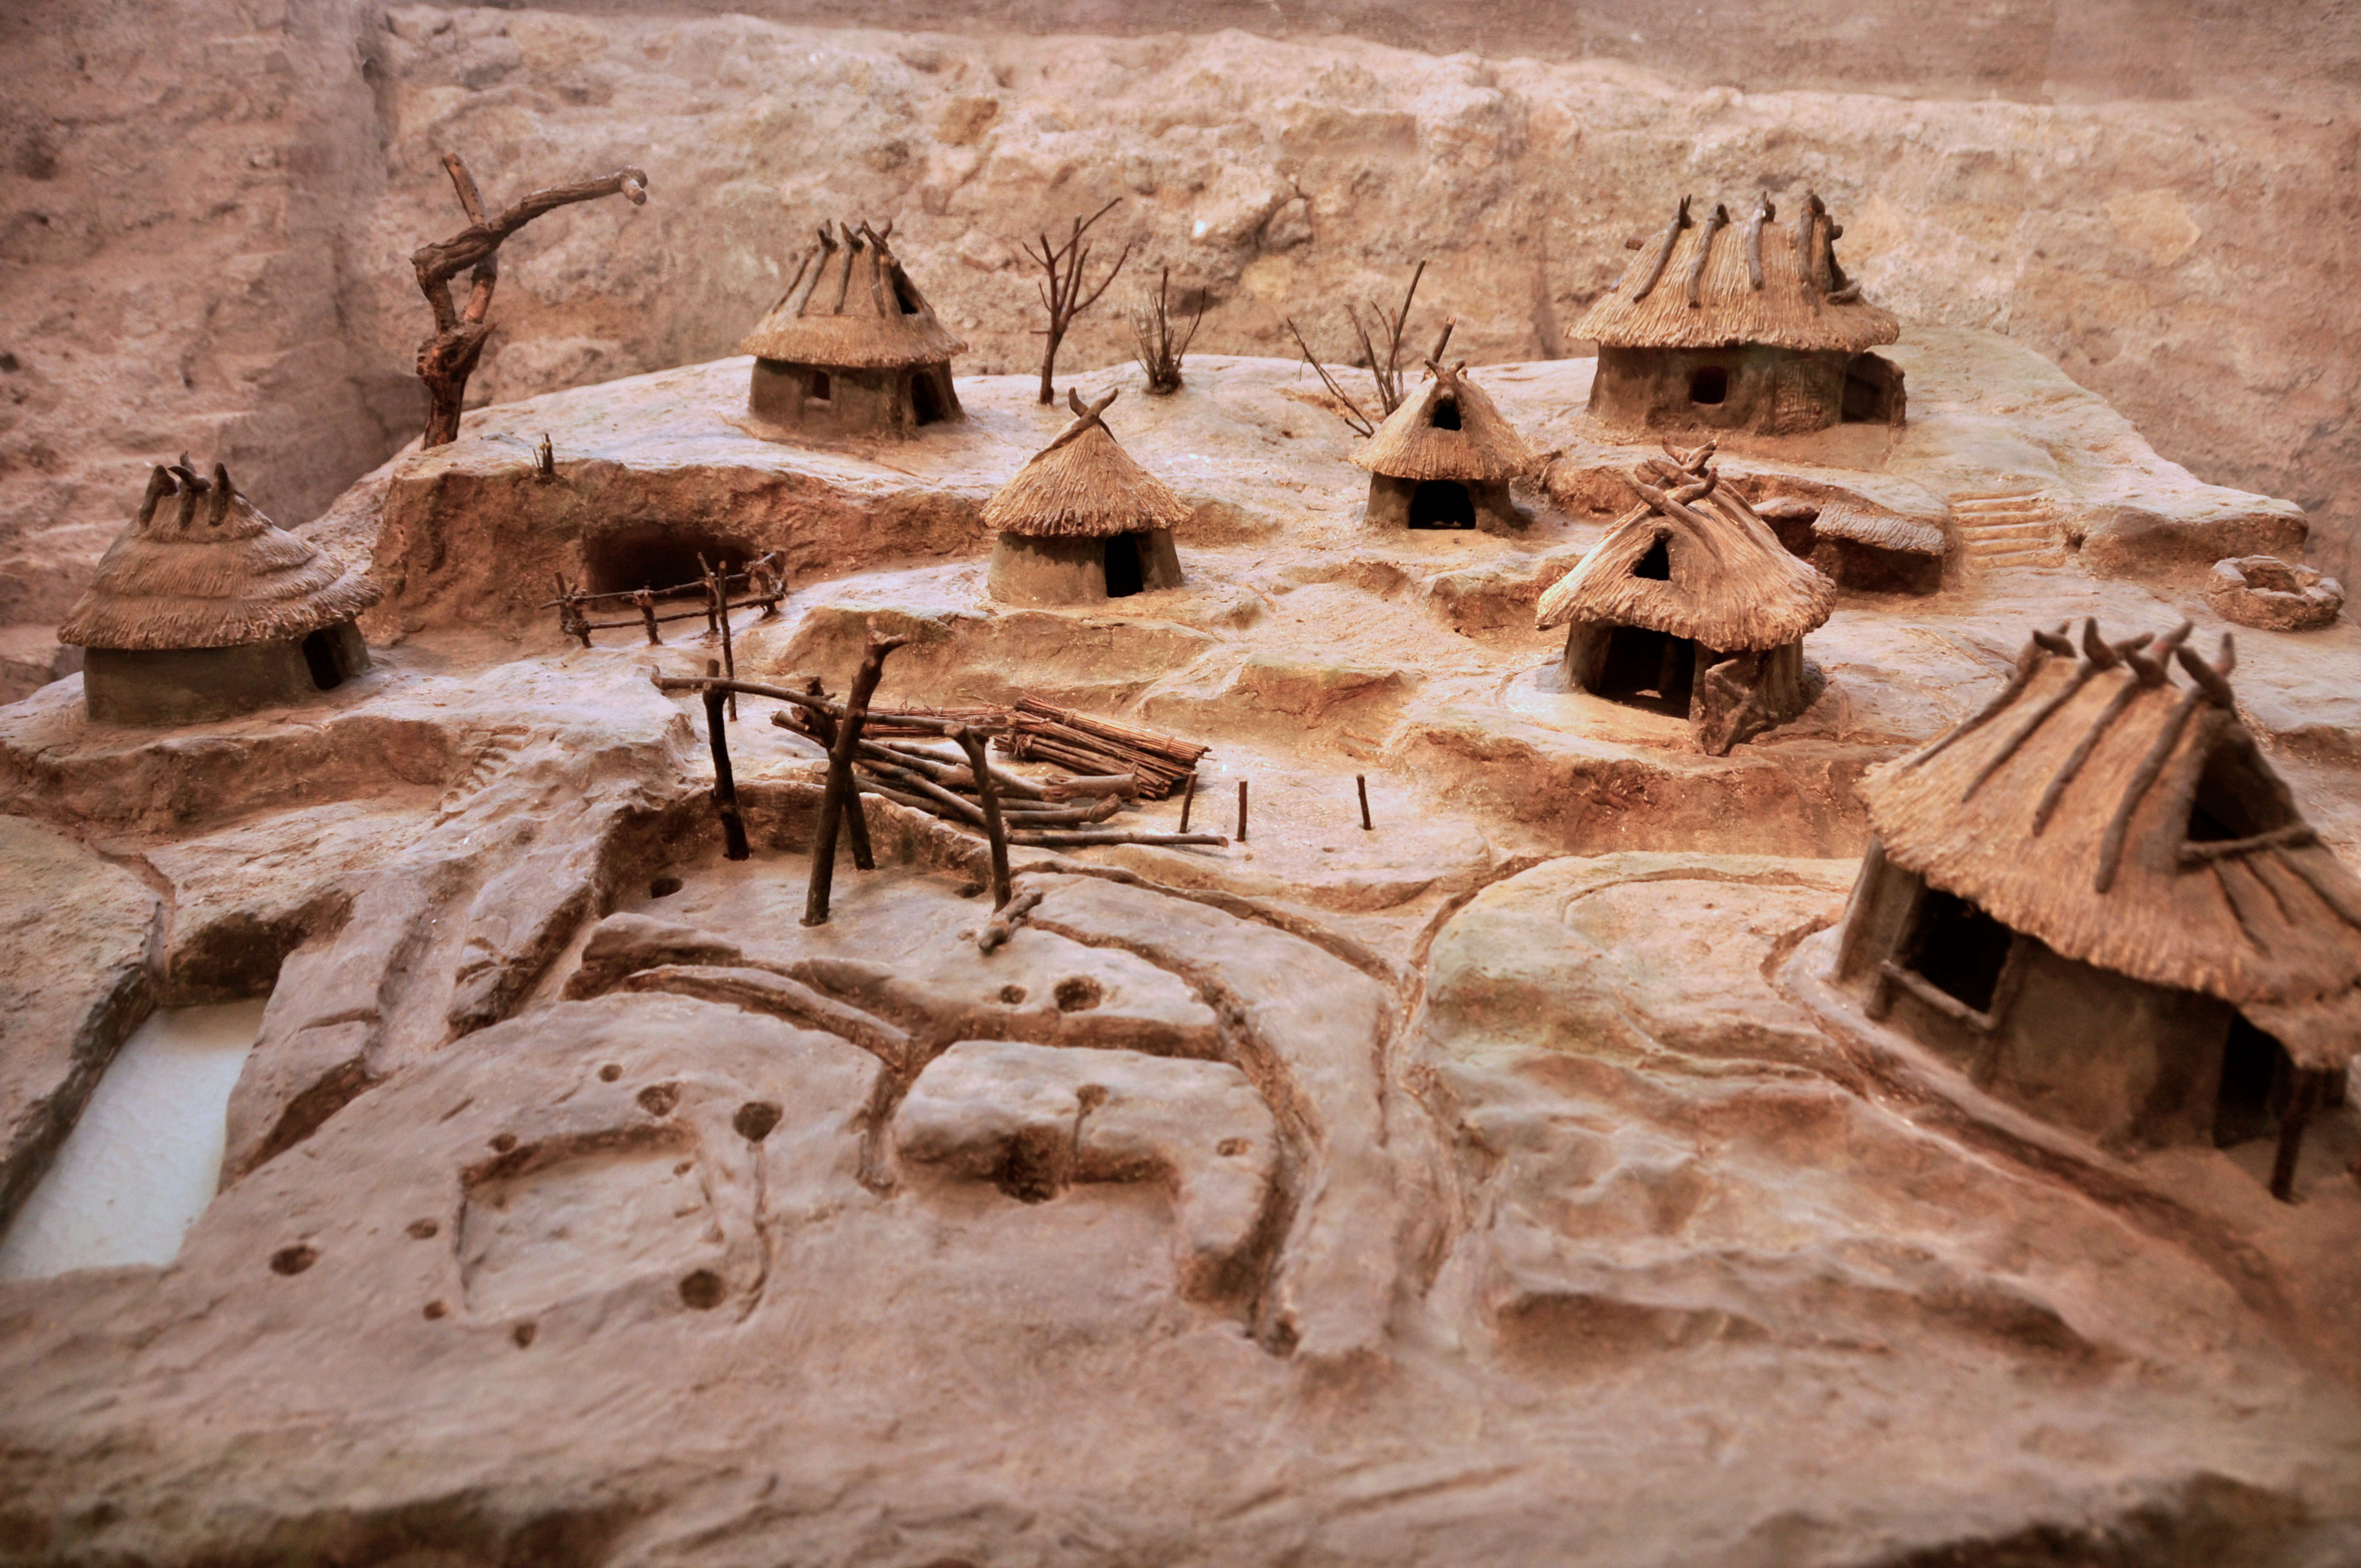 Model of the original settlement. There are huts made of mud, sticks, and straw.